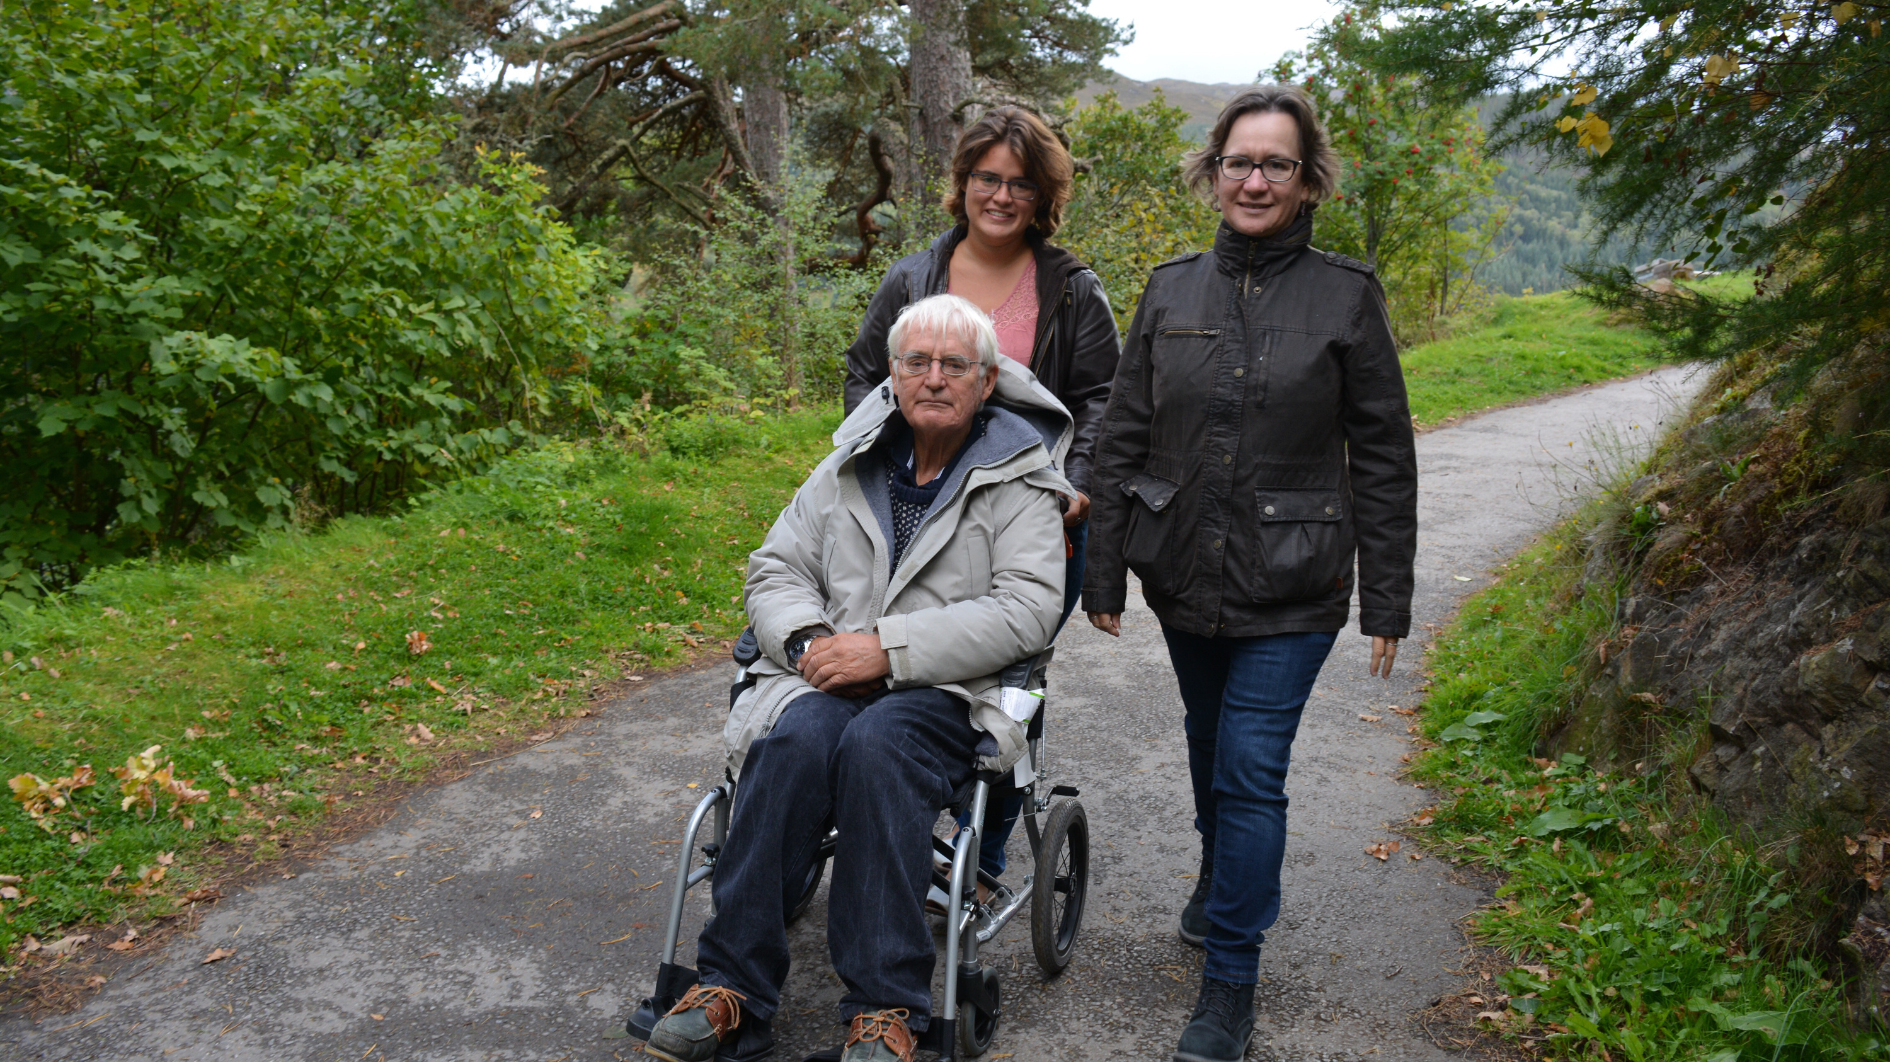 A mother and daughter walking in the countryside pushing an elderly gentleman in a wheelchair